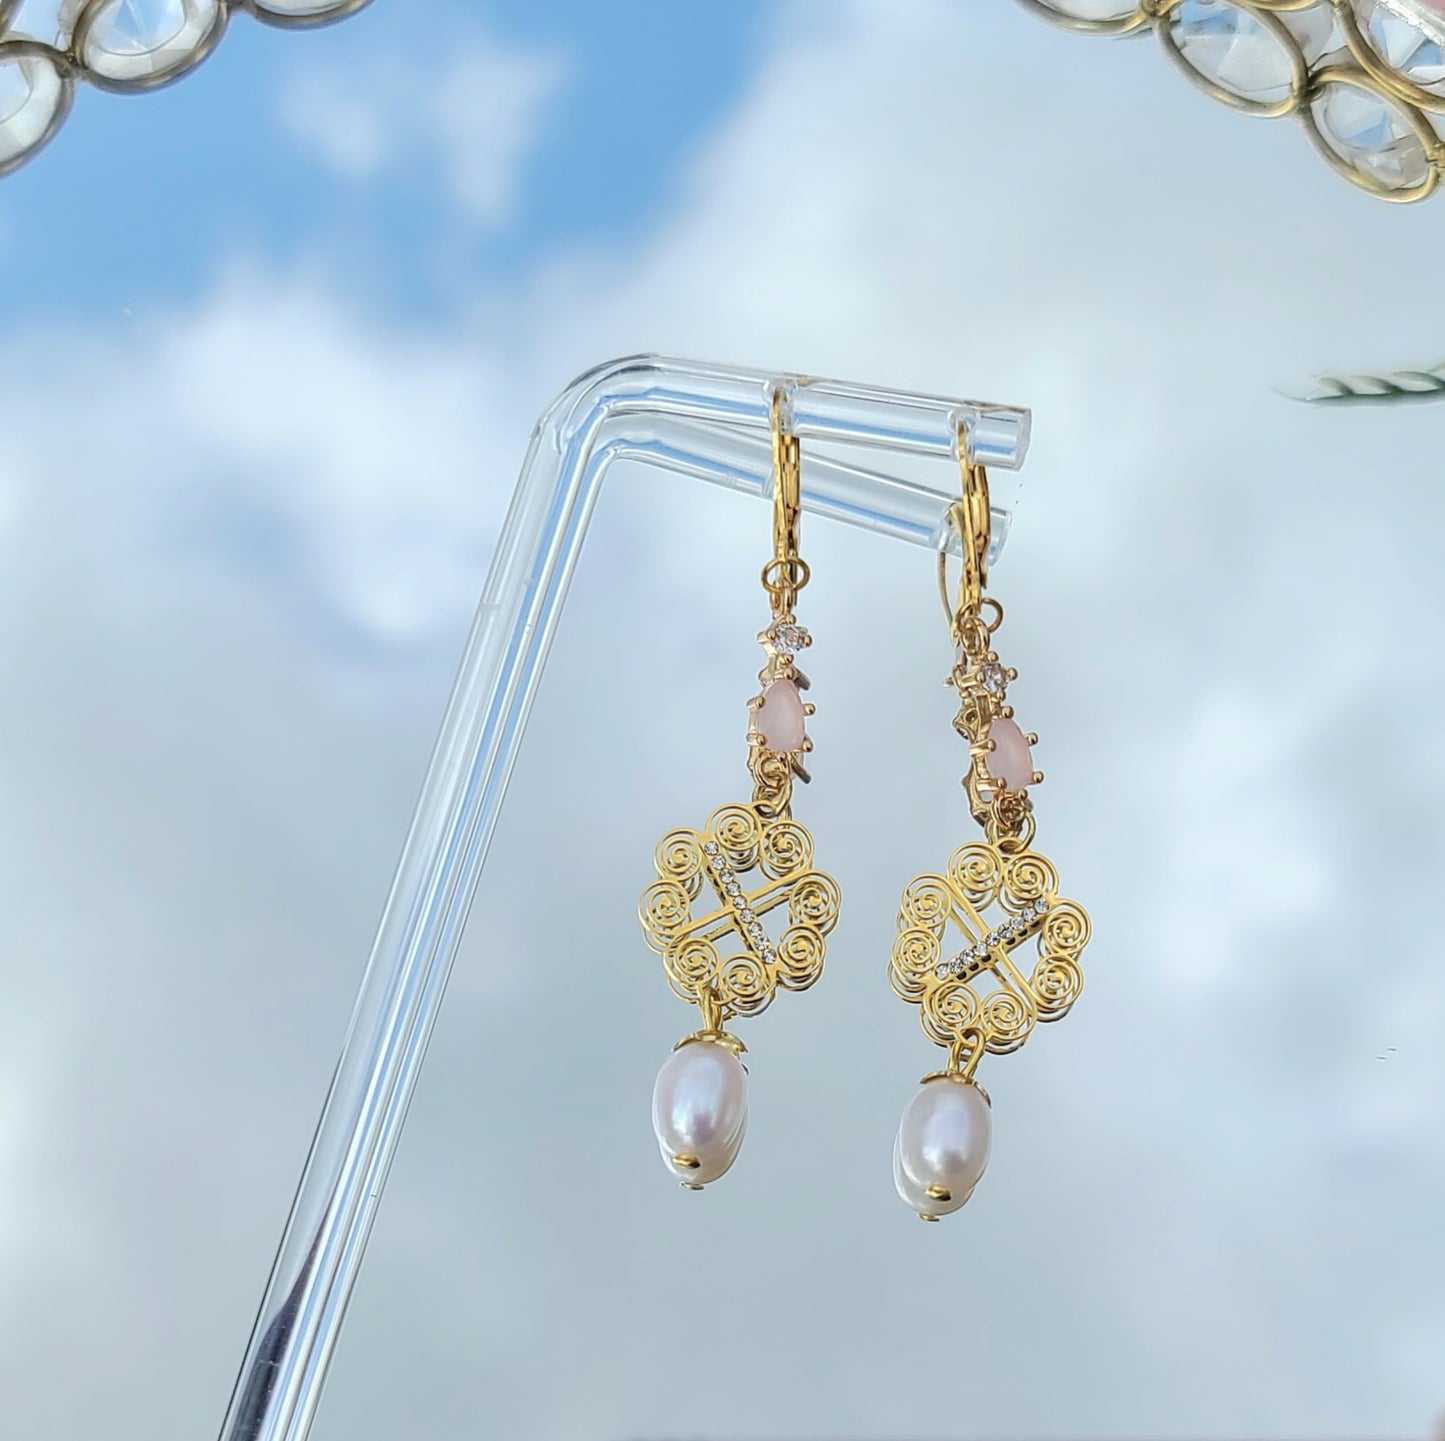 Sophie (Pink) Earrings - 18K Gold Plated, Hypoallergenic, Real Freshwater Pearls